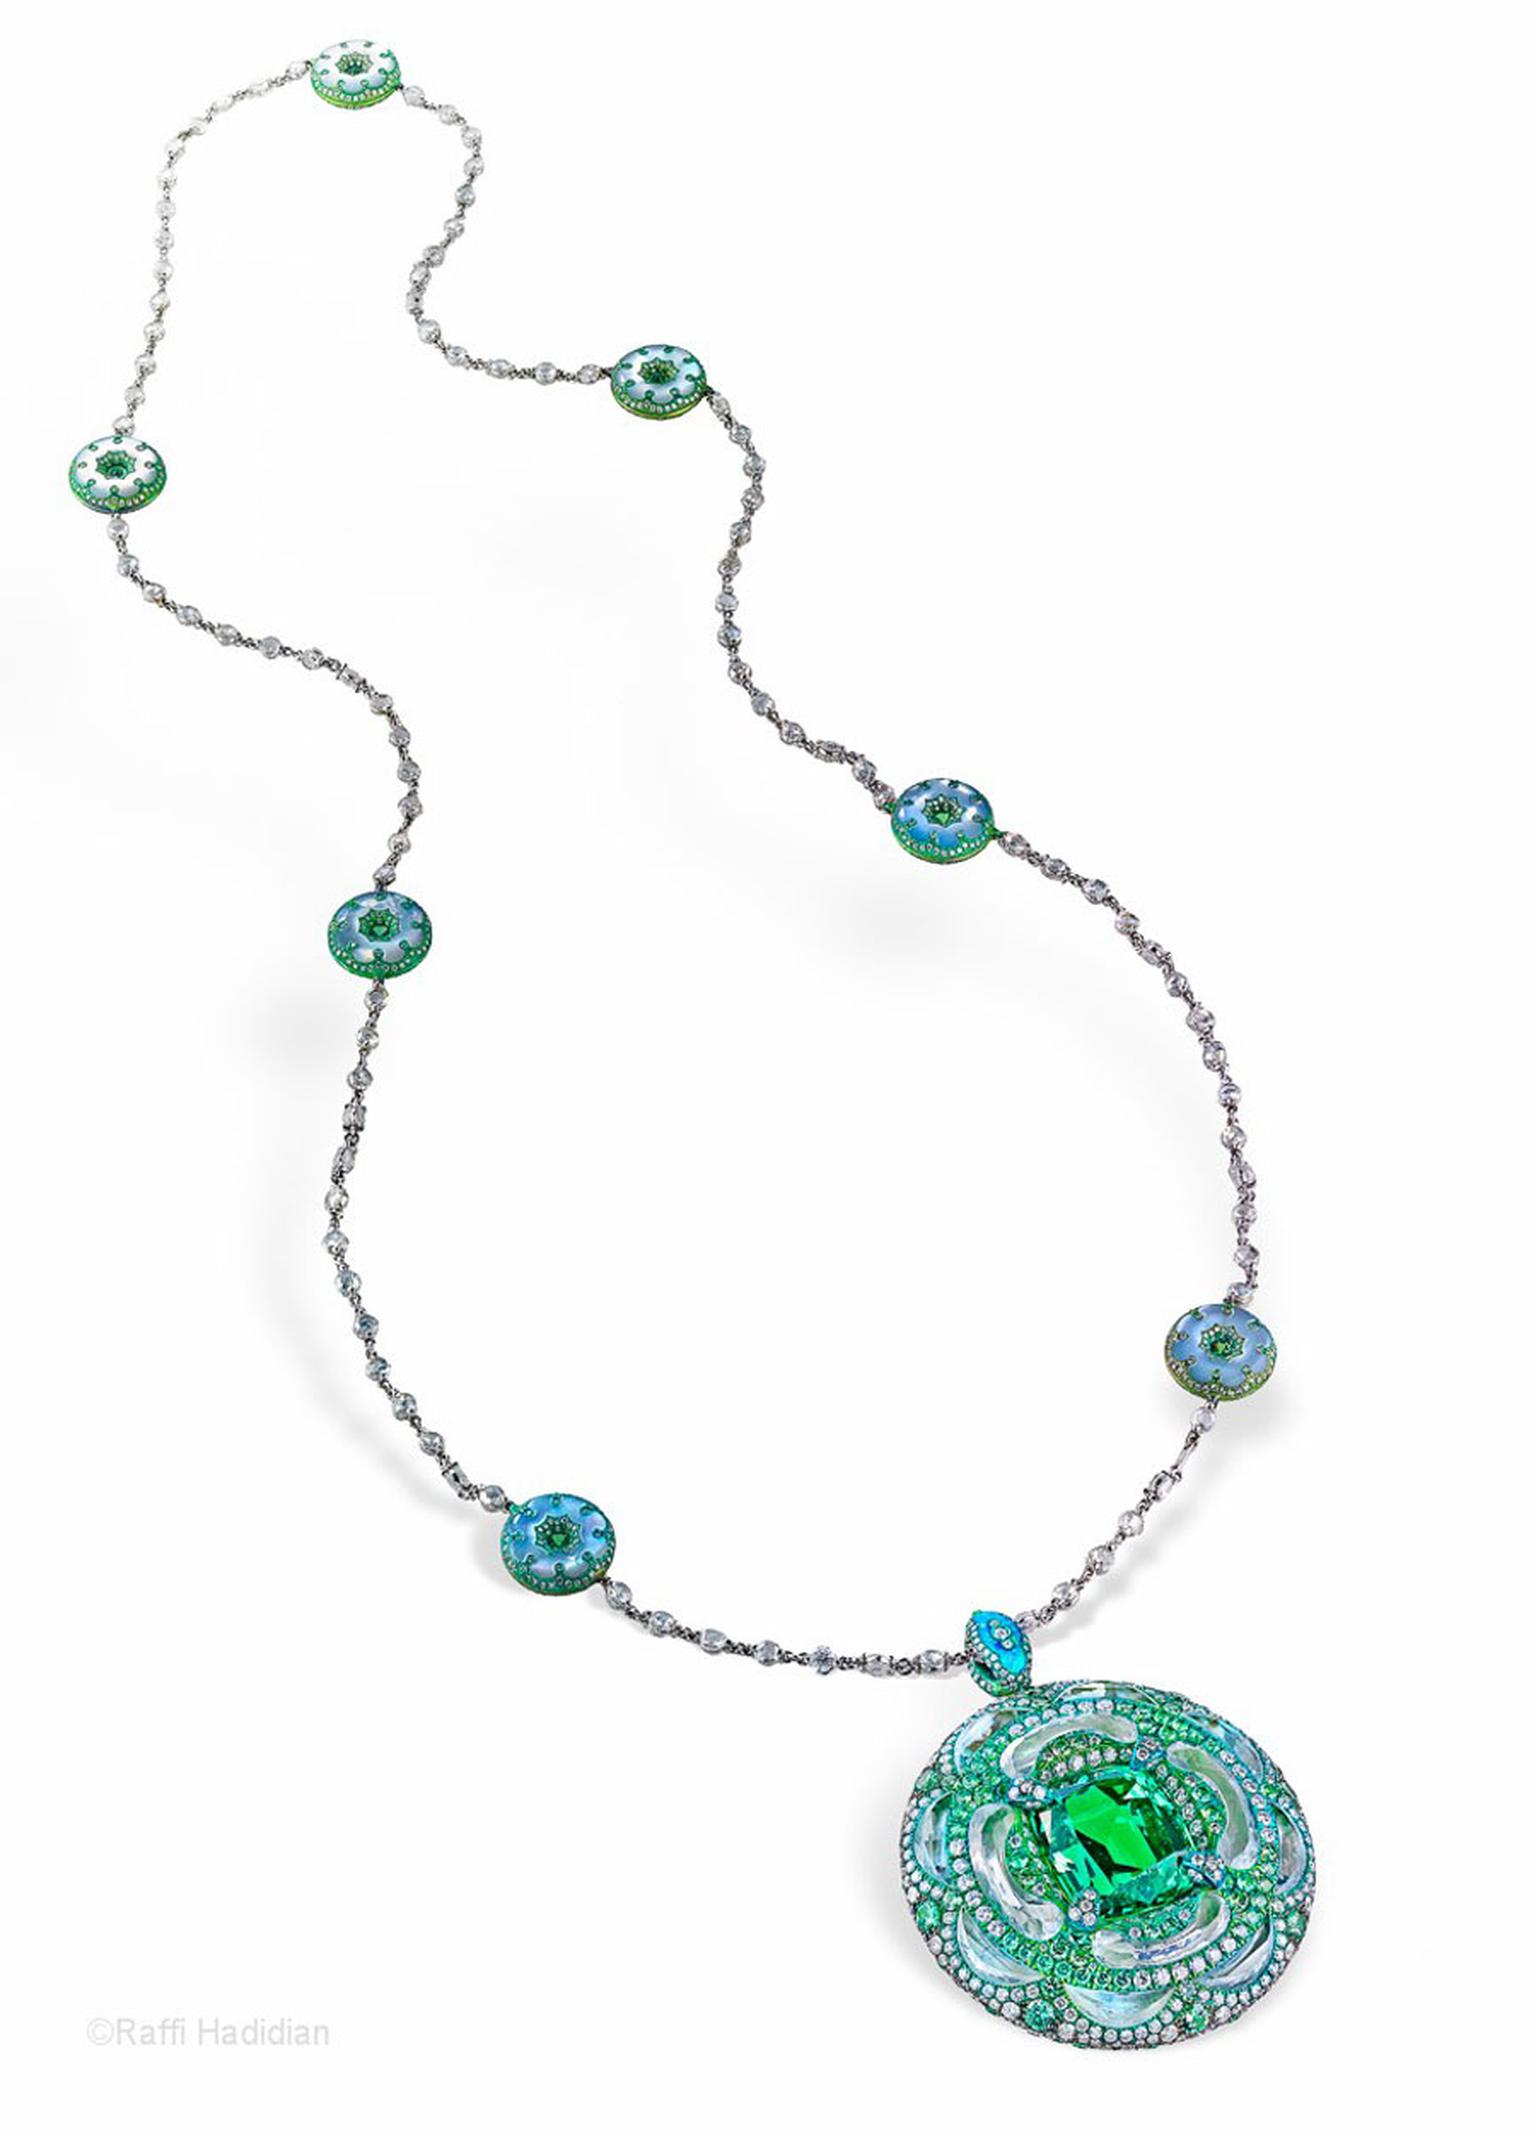 Arunashi took home the top award in the 'Coloured Gemstone Above 20k' category for this emerald pendant at the Couture Design Awards 2013.